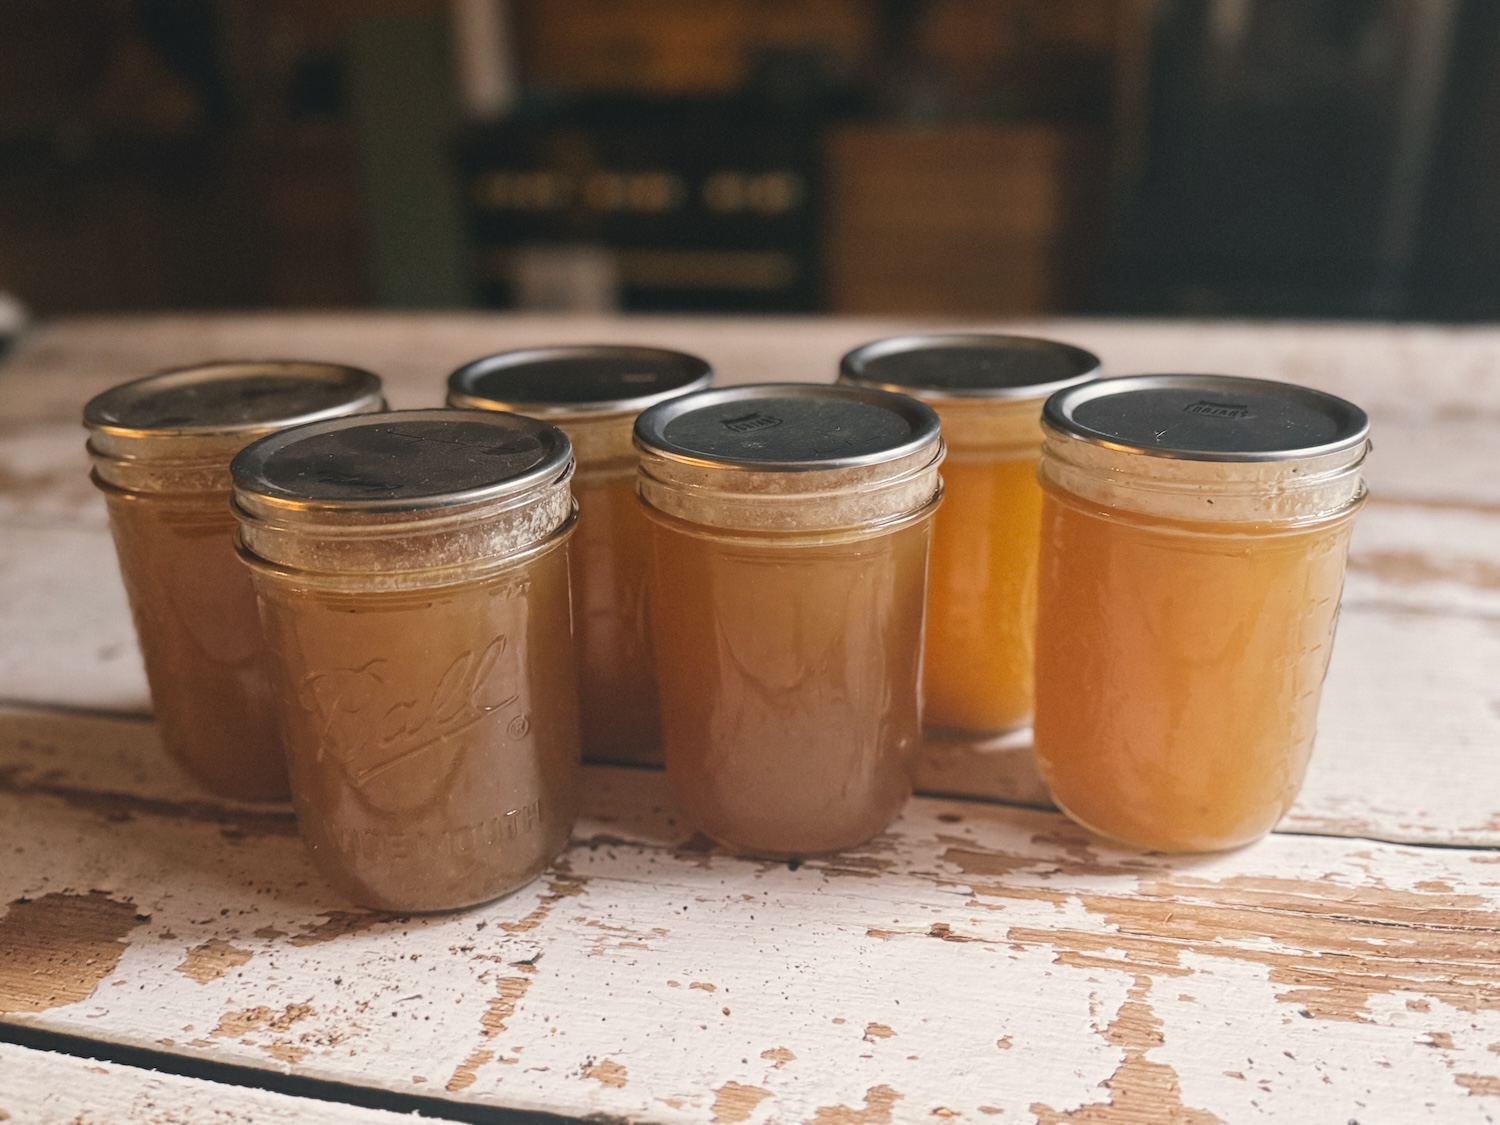 6 jars of pressure canned bone broth sitting on a wooden kitchen island